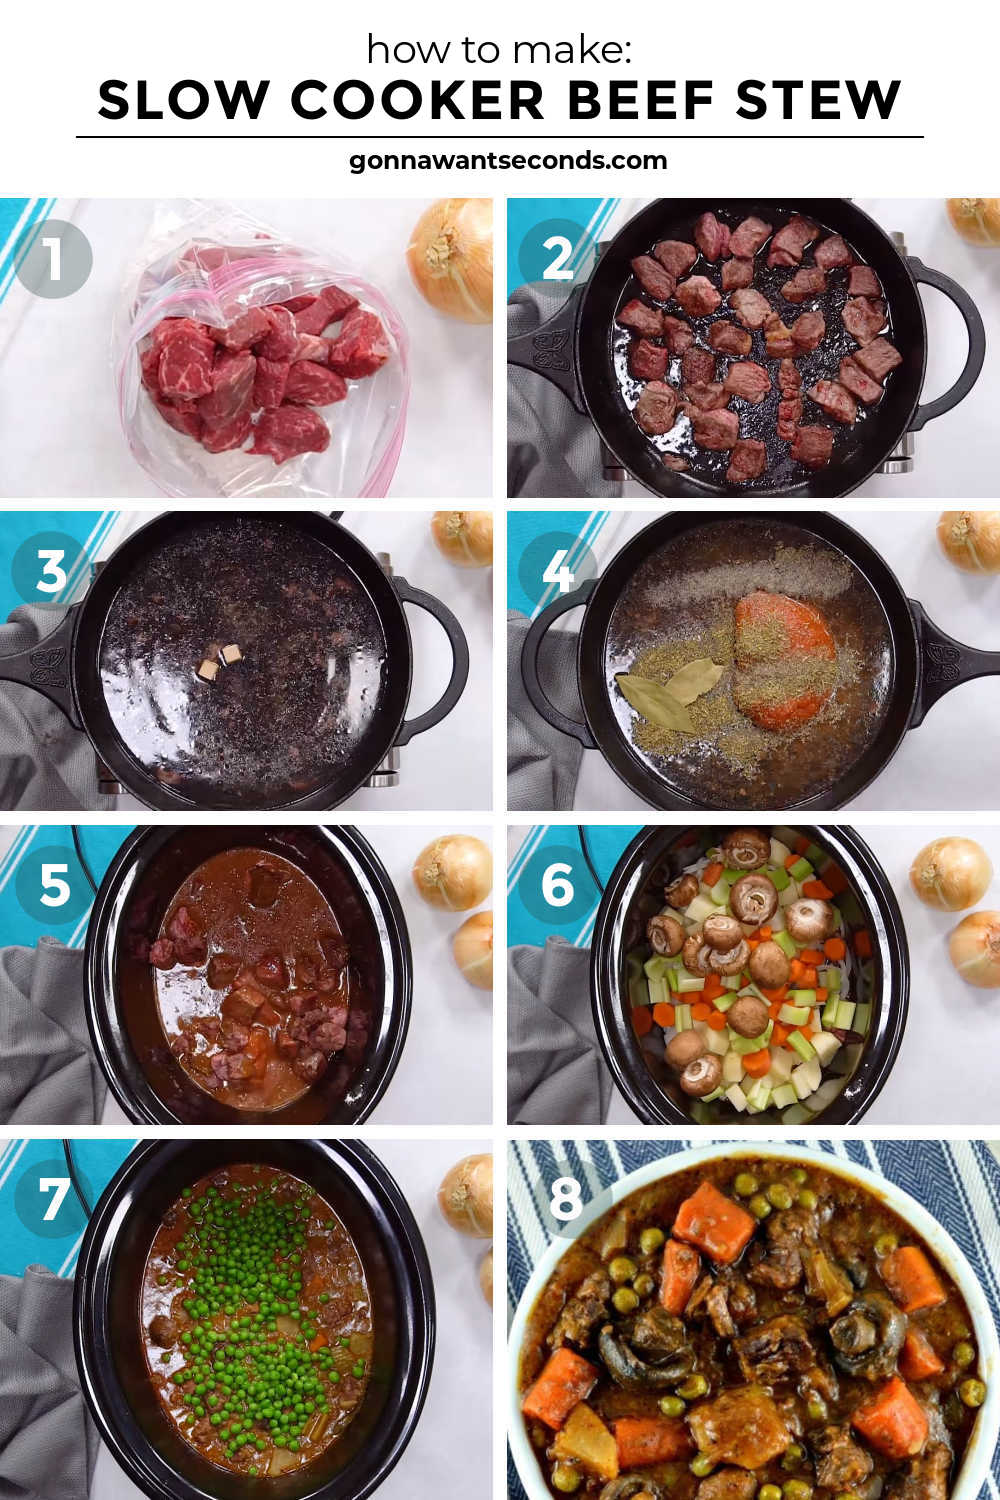 Step by step how to make slow cooker beef stew